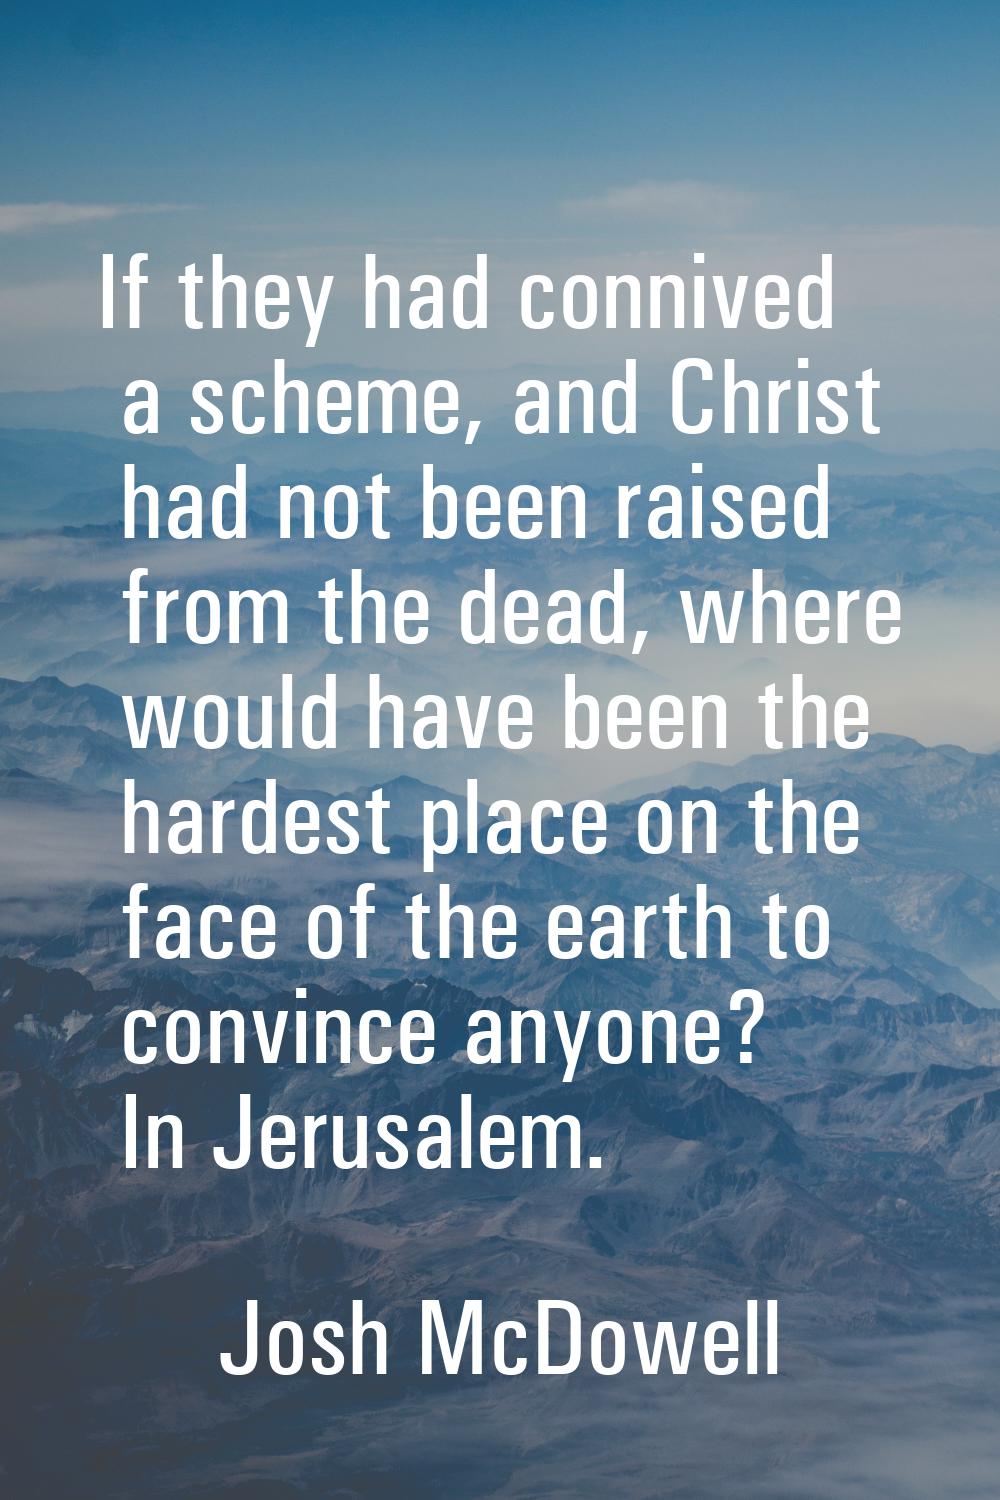 If they had connived a scheme, and Christ had not been raised from the dead, where would have been 